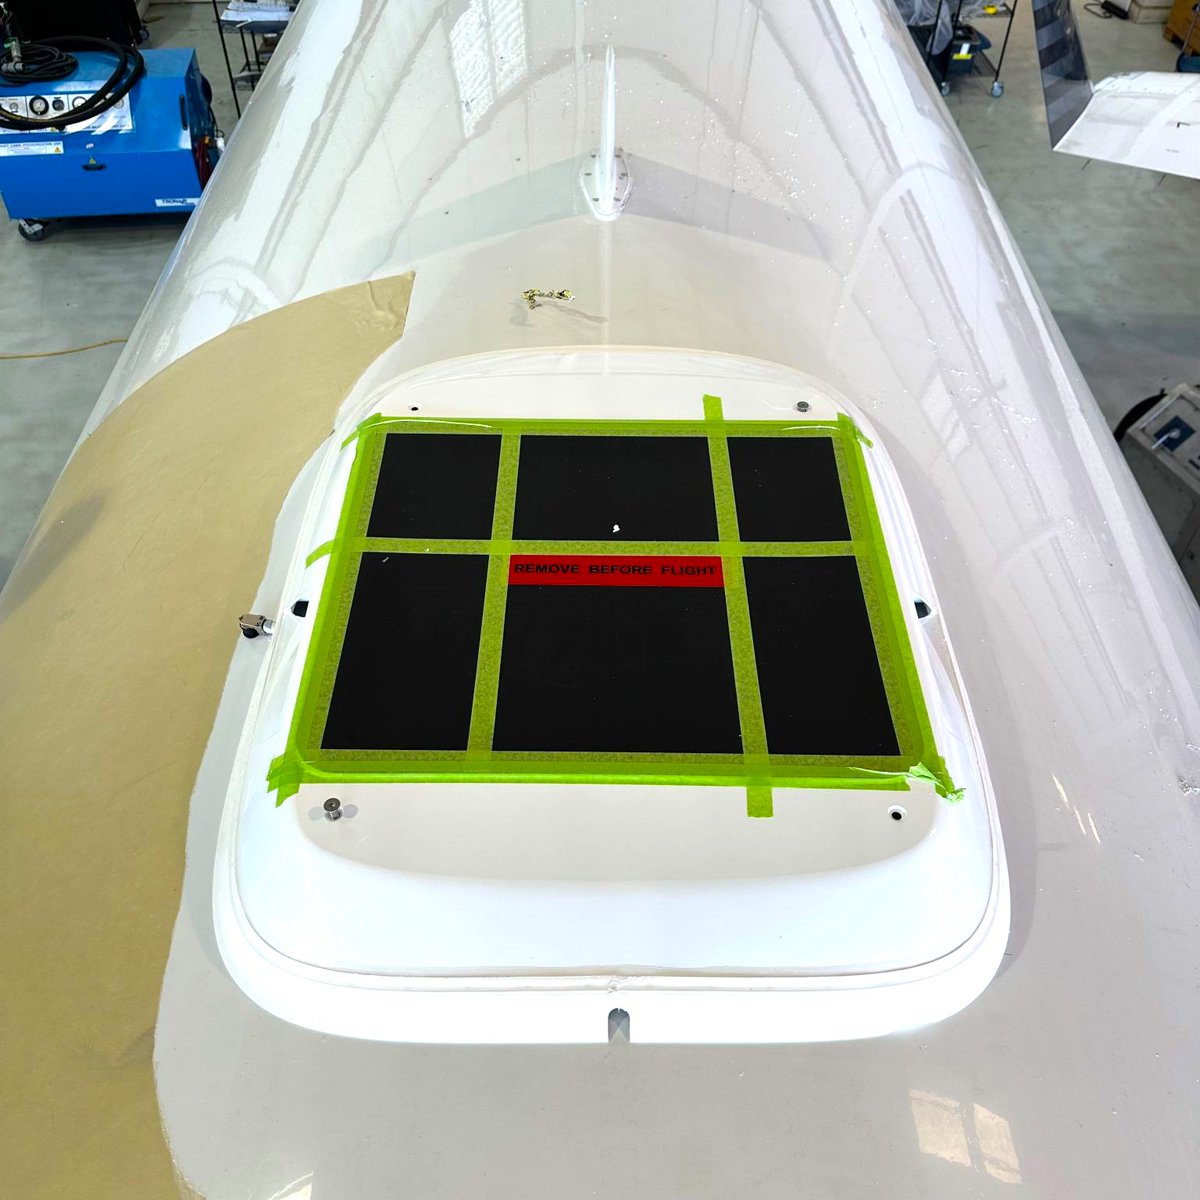 Vince Russo, Director of Avionics at Thornton Aviation, “We are one week into a Global Express Starlink installation. The STC is clear, and the antenna mounting is the same as the G650 we recently completed. I am confident we can turn a Global Starlink install in three weeks or…